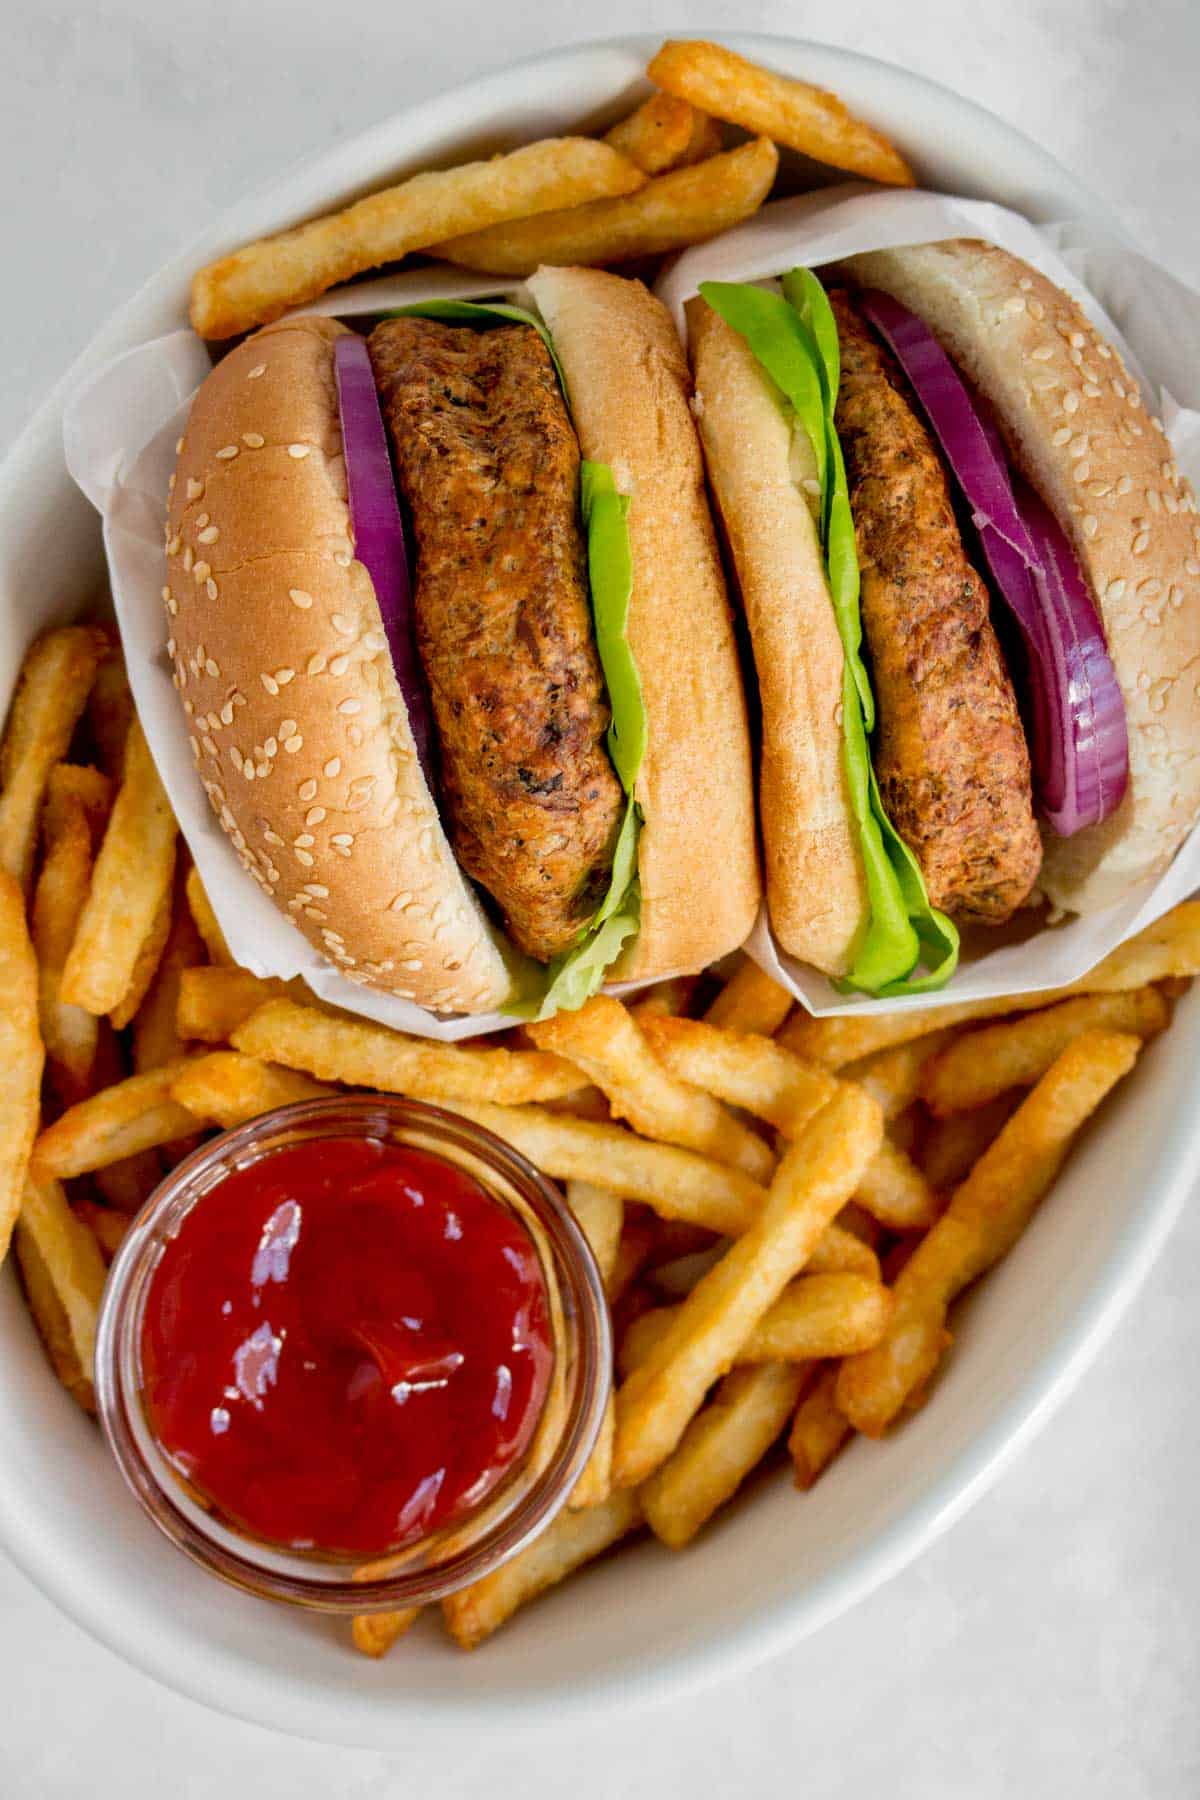 Close-up of two turkey burgers with fries and ketchup